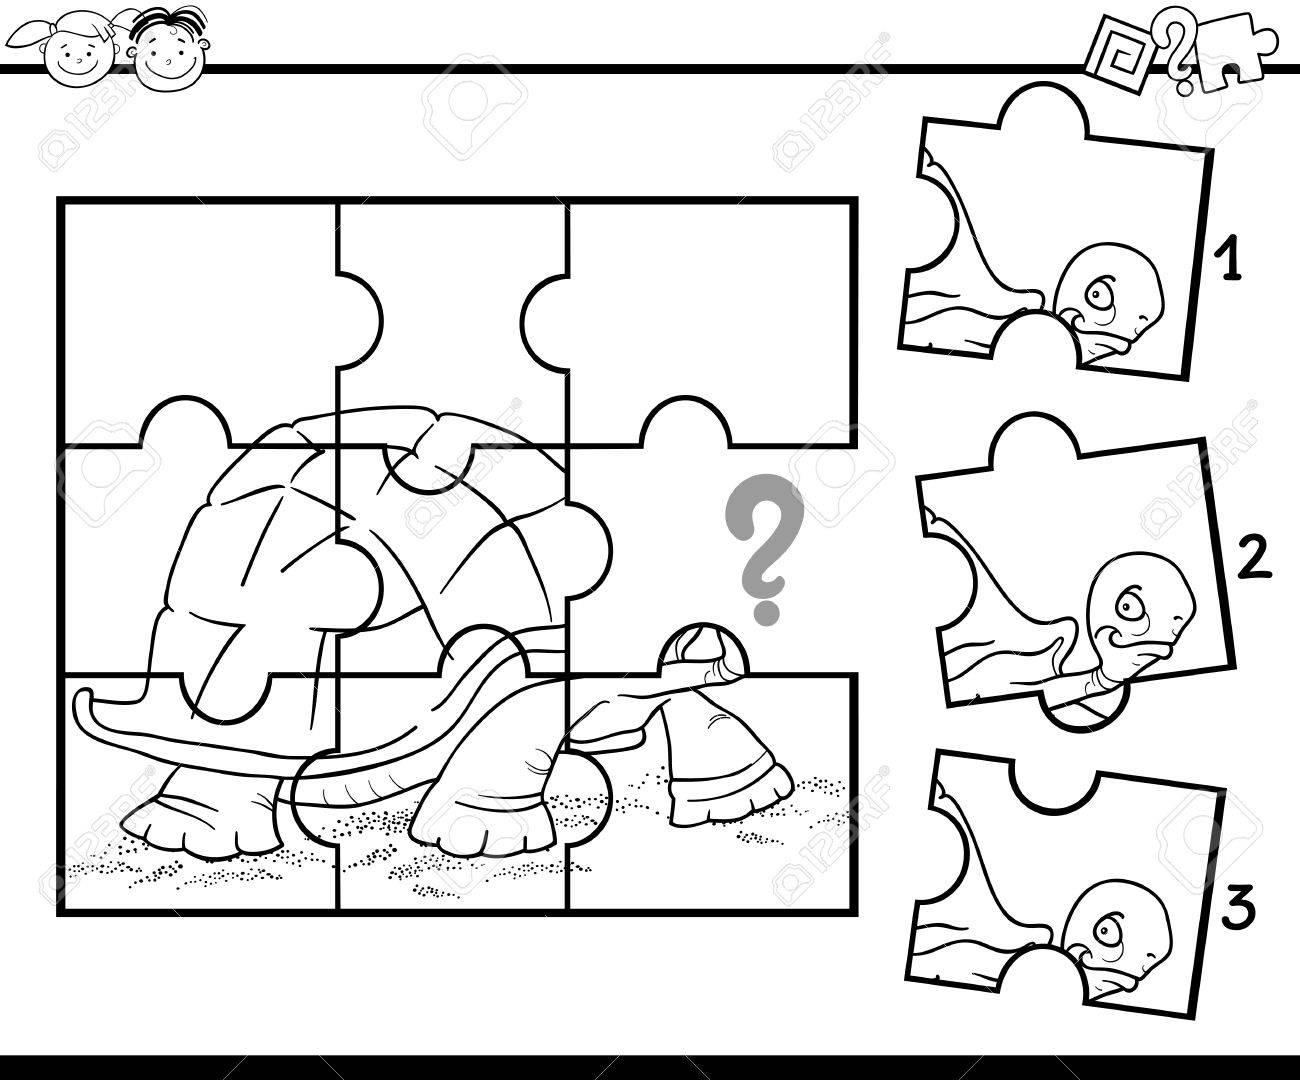 Black and white cartoon illustration of jigsaw puzzle education game for preschool children with turtle for coloring royalty free svg cliparts vectors and stock illustration image